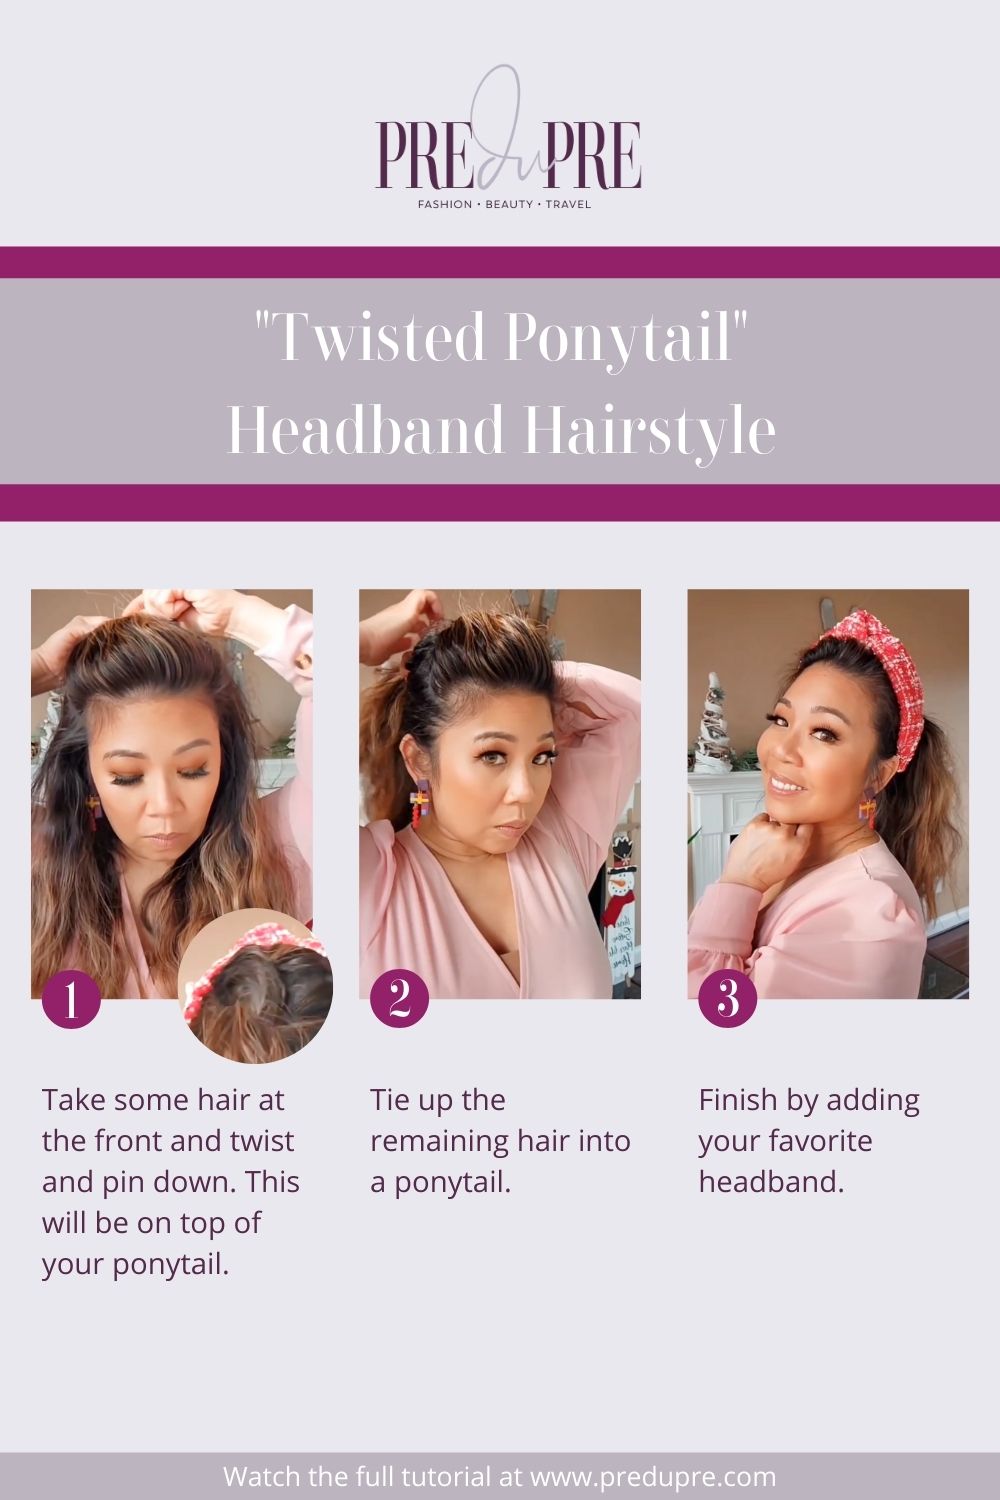 Woman pulls upu hair in the front, twist it then secures with bobby pin.  She takes the rest of her hair into a ponytail.  Adds a headband to finish the look.